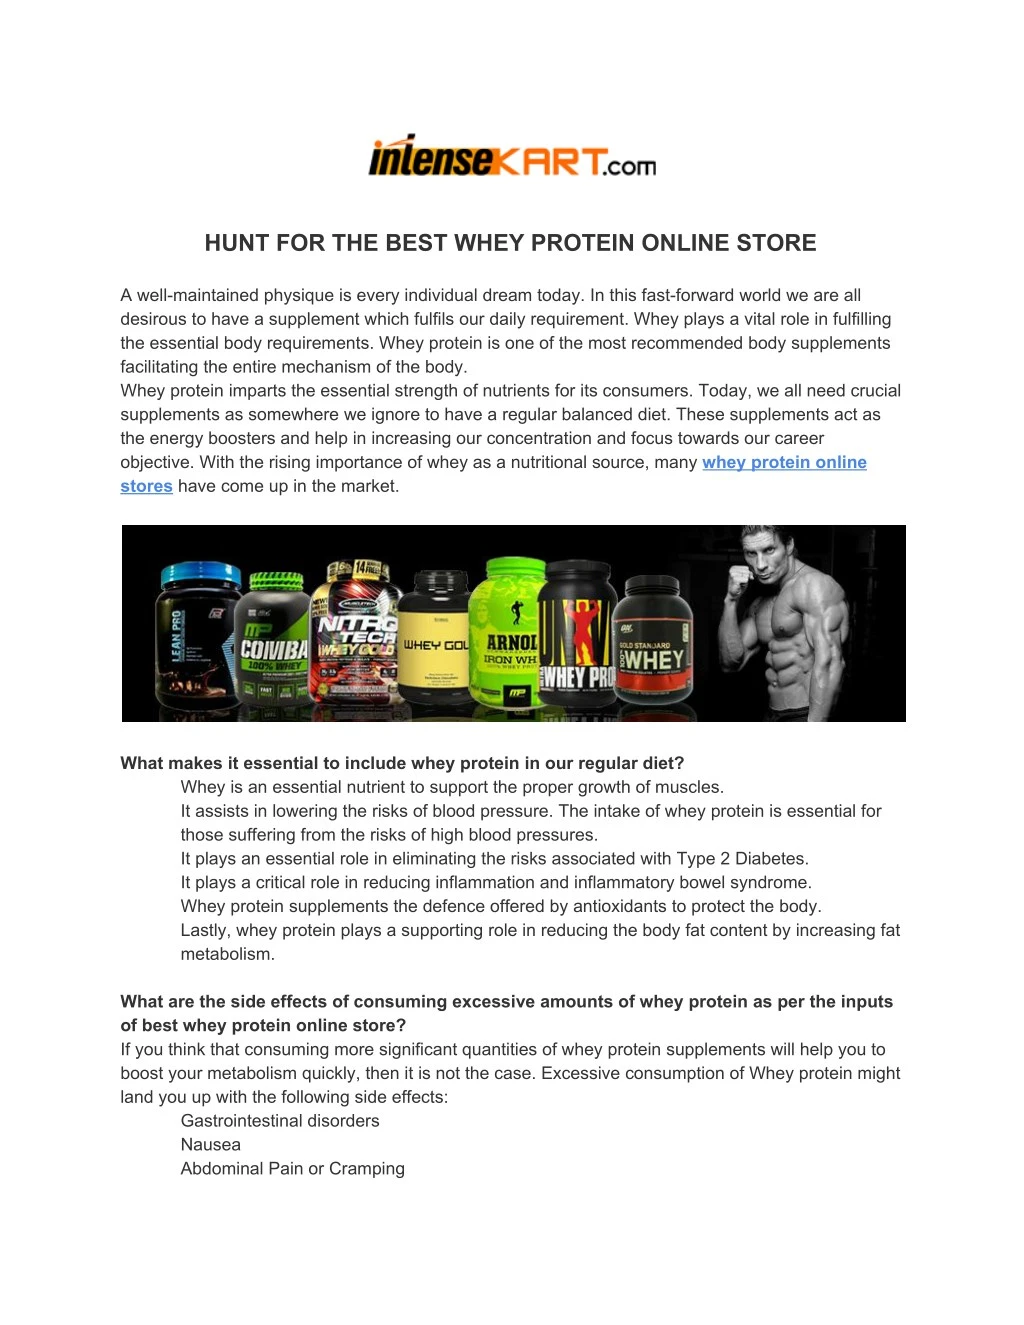 hunt for the best whey protein online store